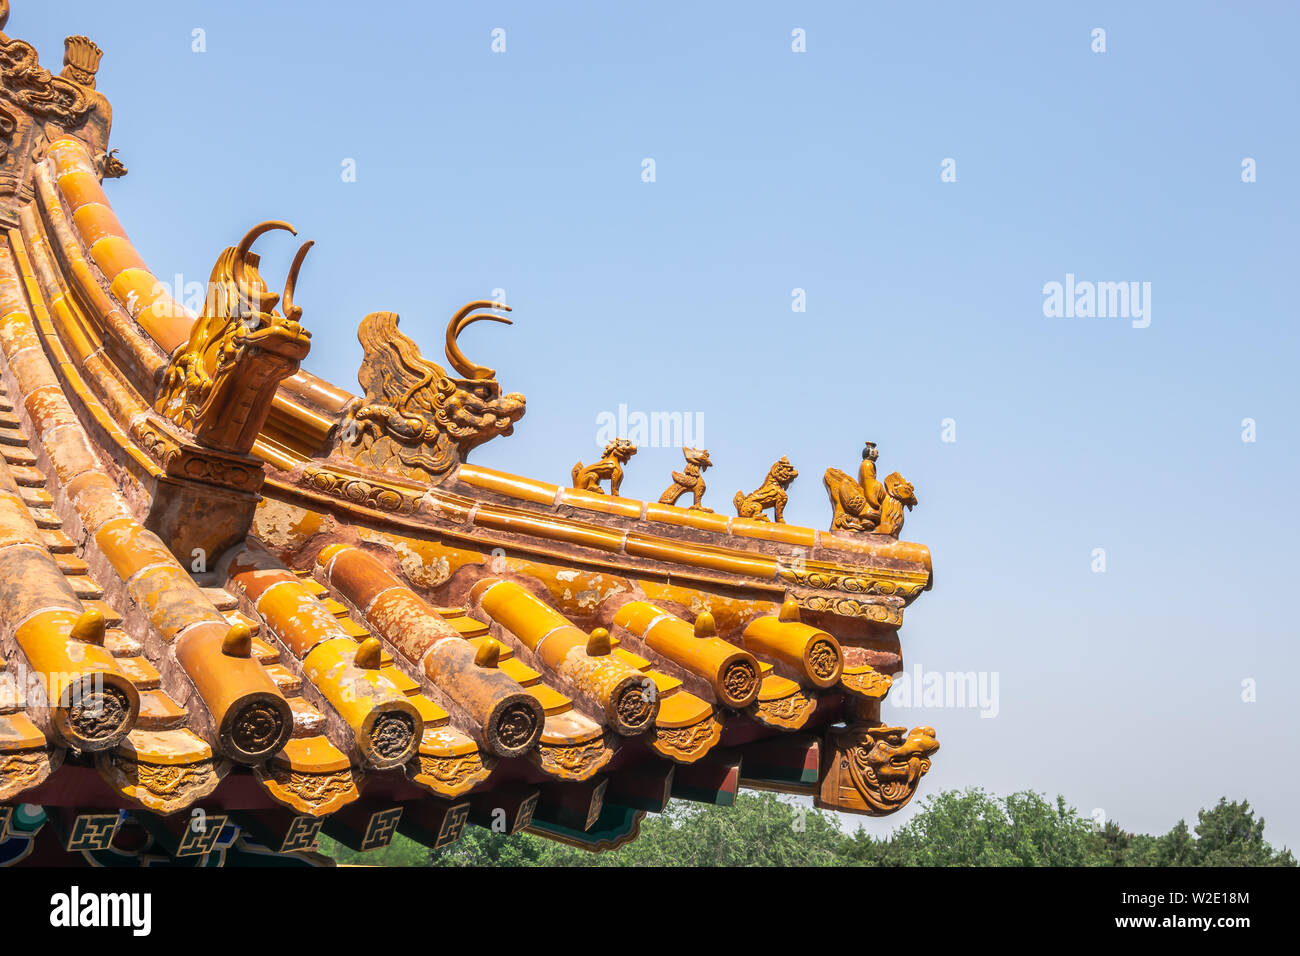 The iconic character of Chinese imperial roof decorations, the roof from building of Forbidden city  in Beijing, China Stock Photo